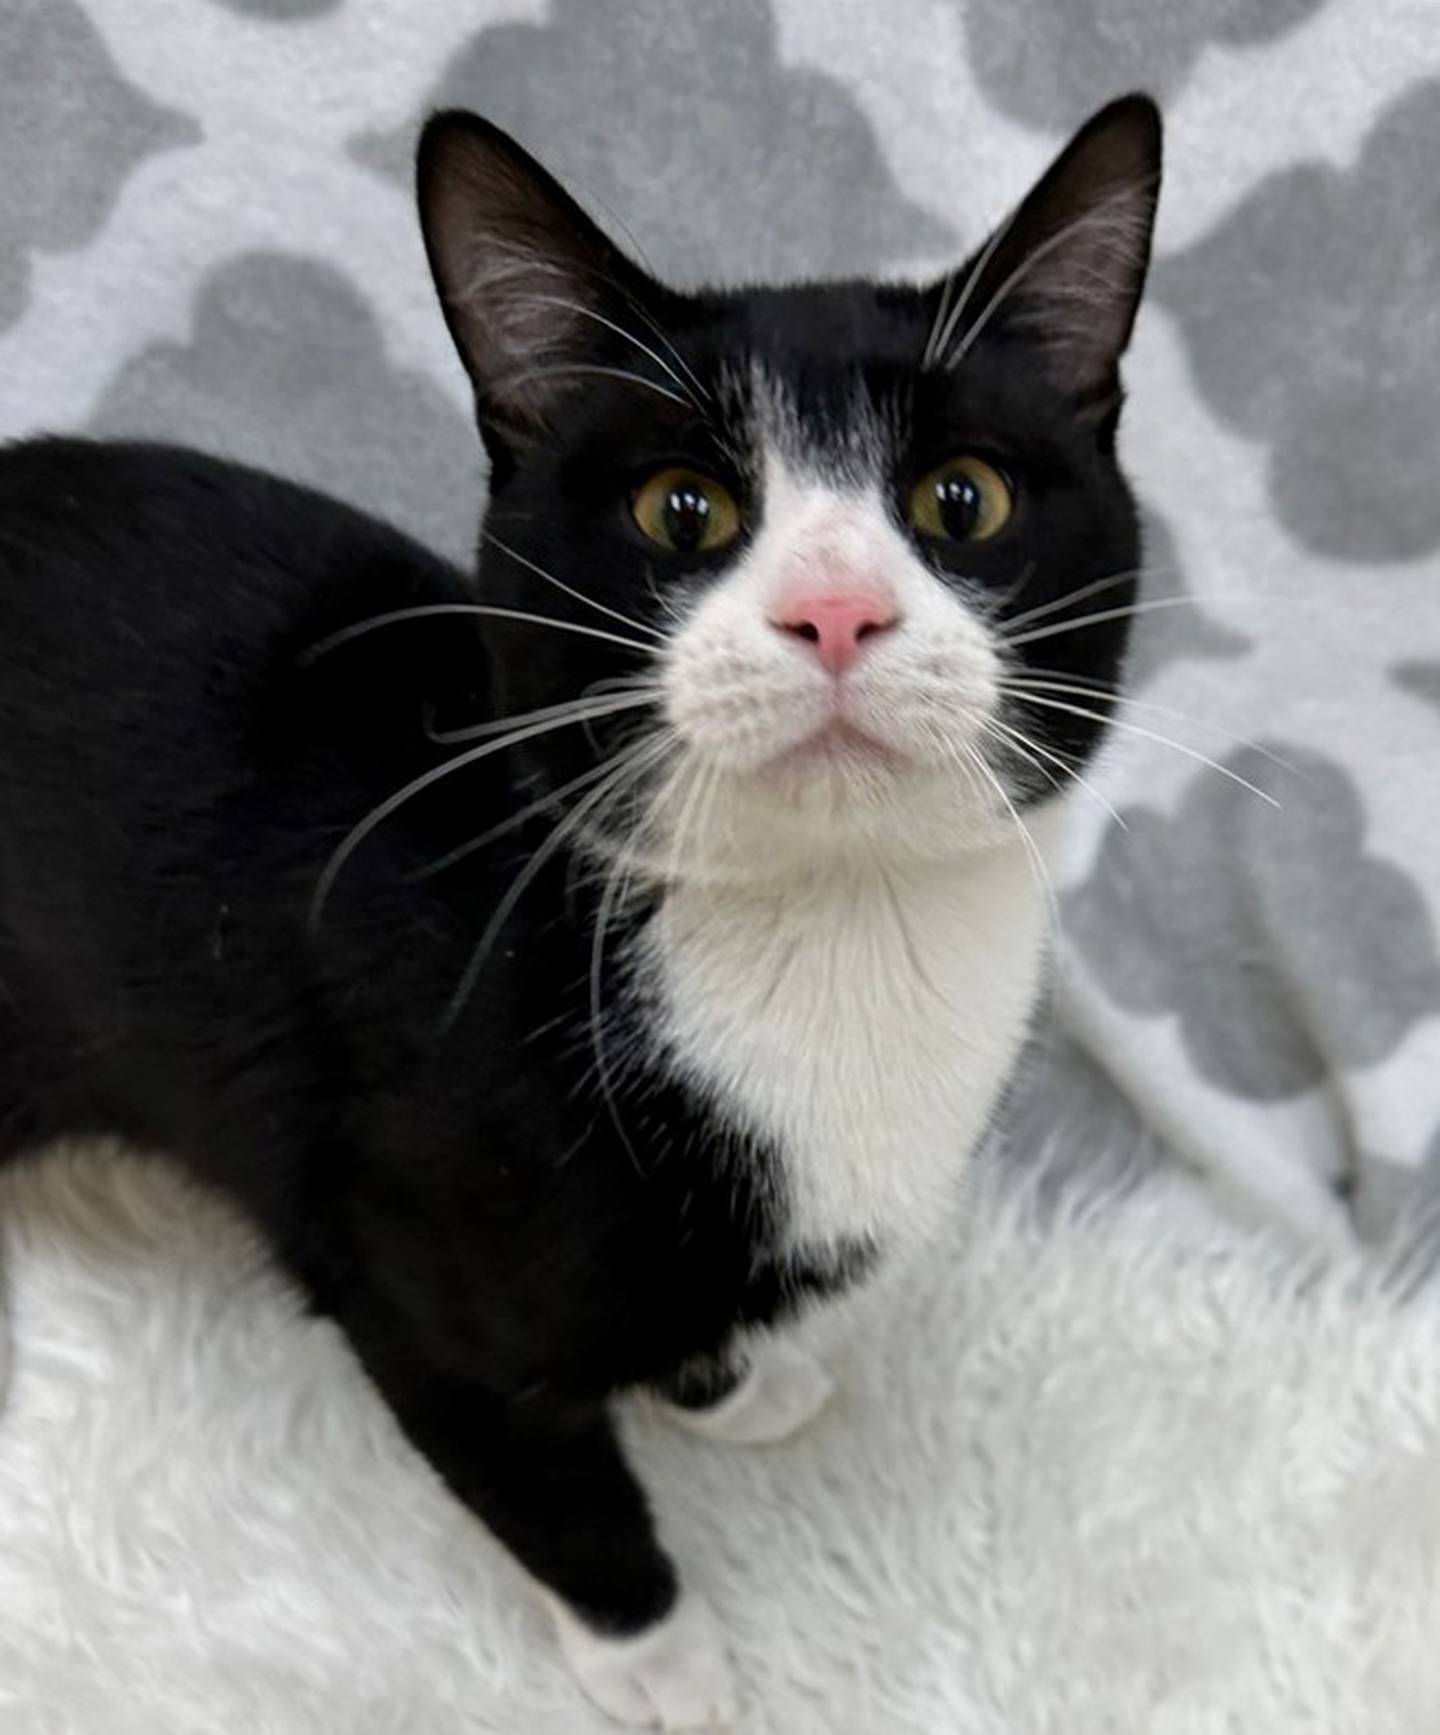 Hammy is 10 months old and needs a family that will appreciate his exuberance for life and doesn’t mind a loud and needy cat in their lives. Hammy is talkative and follows people around. To meet Hammy, call Joliet Township Animal Control at 815-725-0333.